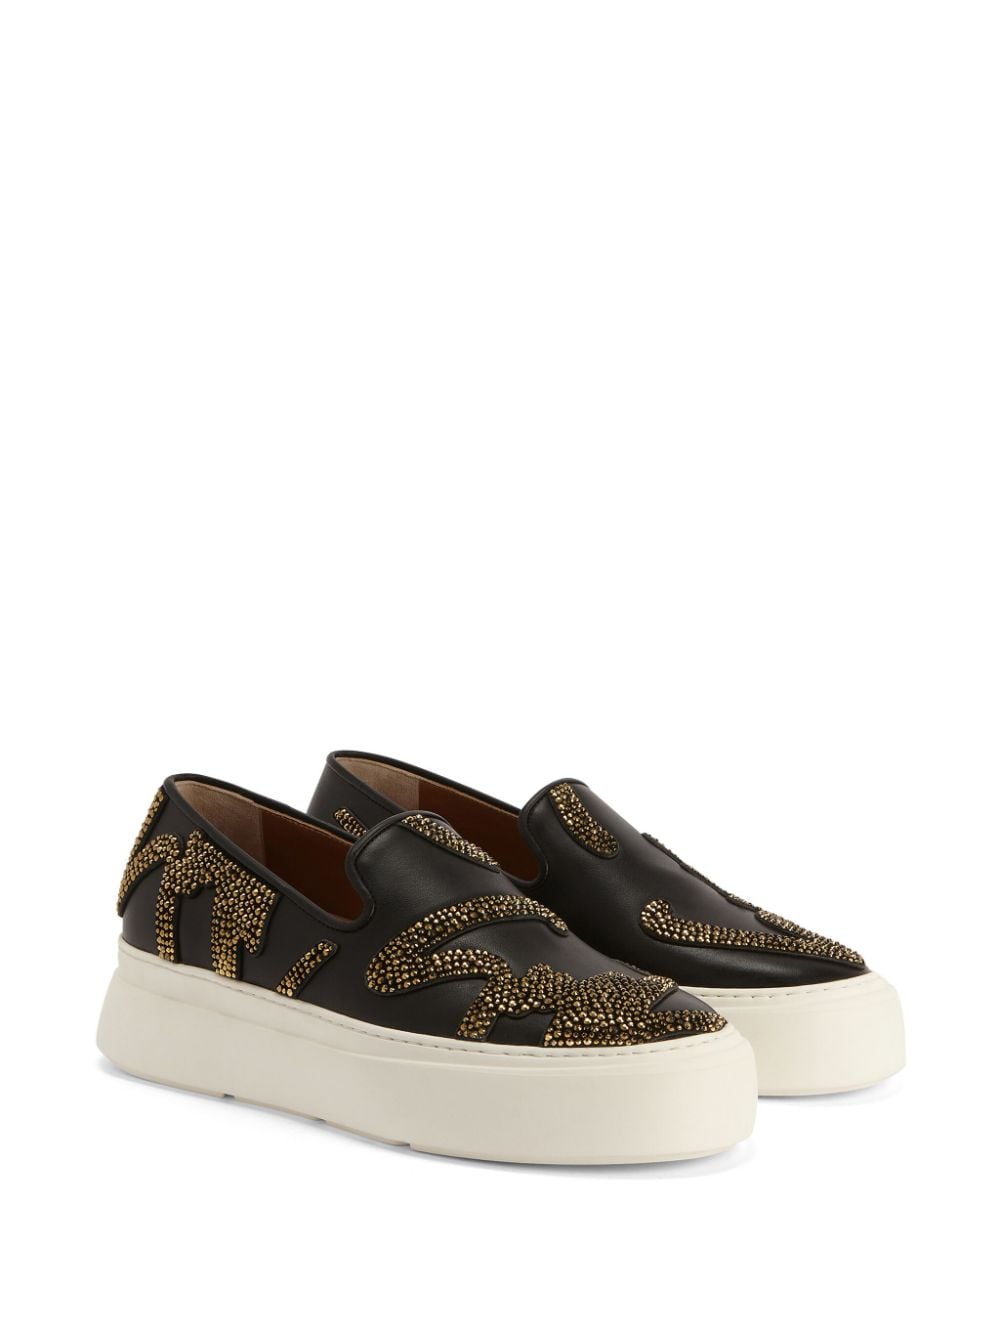 Image 2 of Giuseppe Zanotti Gz Mike Sign leather slip-on sneakers